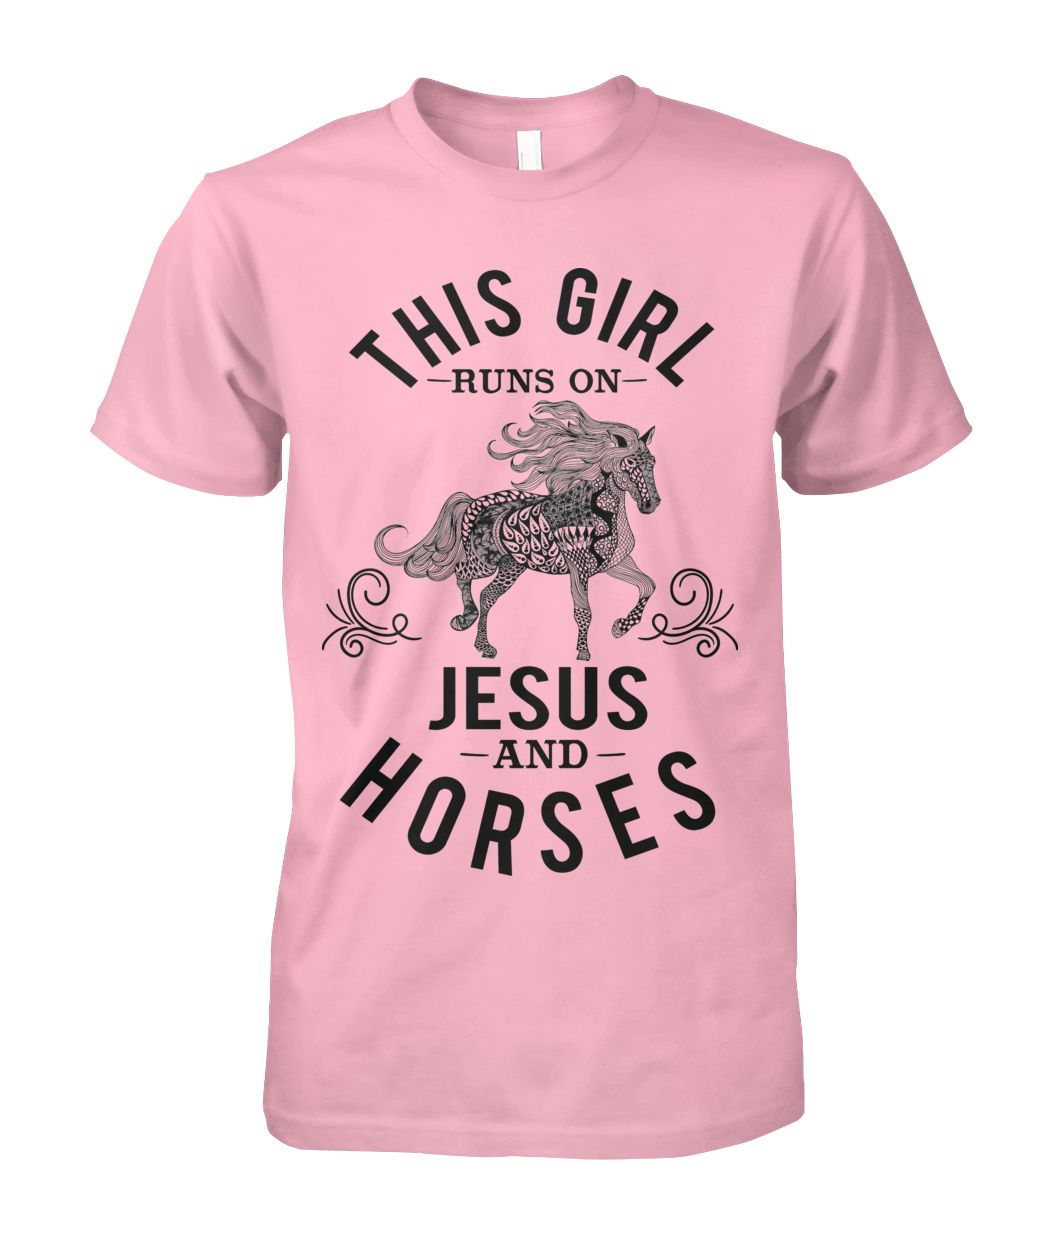 This Girl Runs On Jesus and Horses T-Shirt